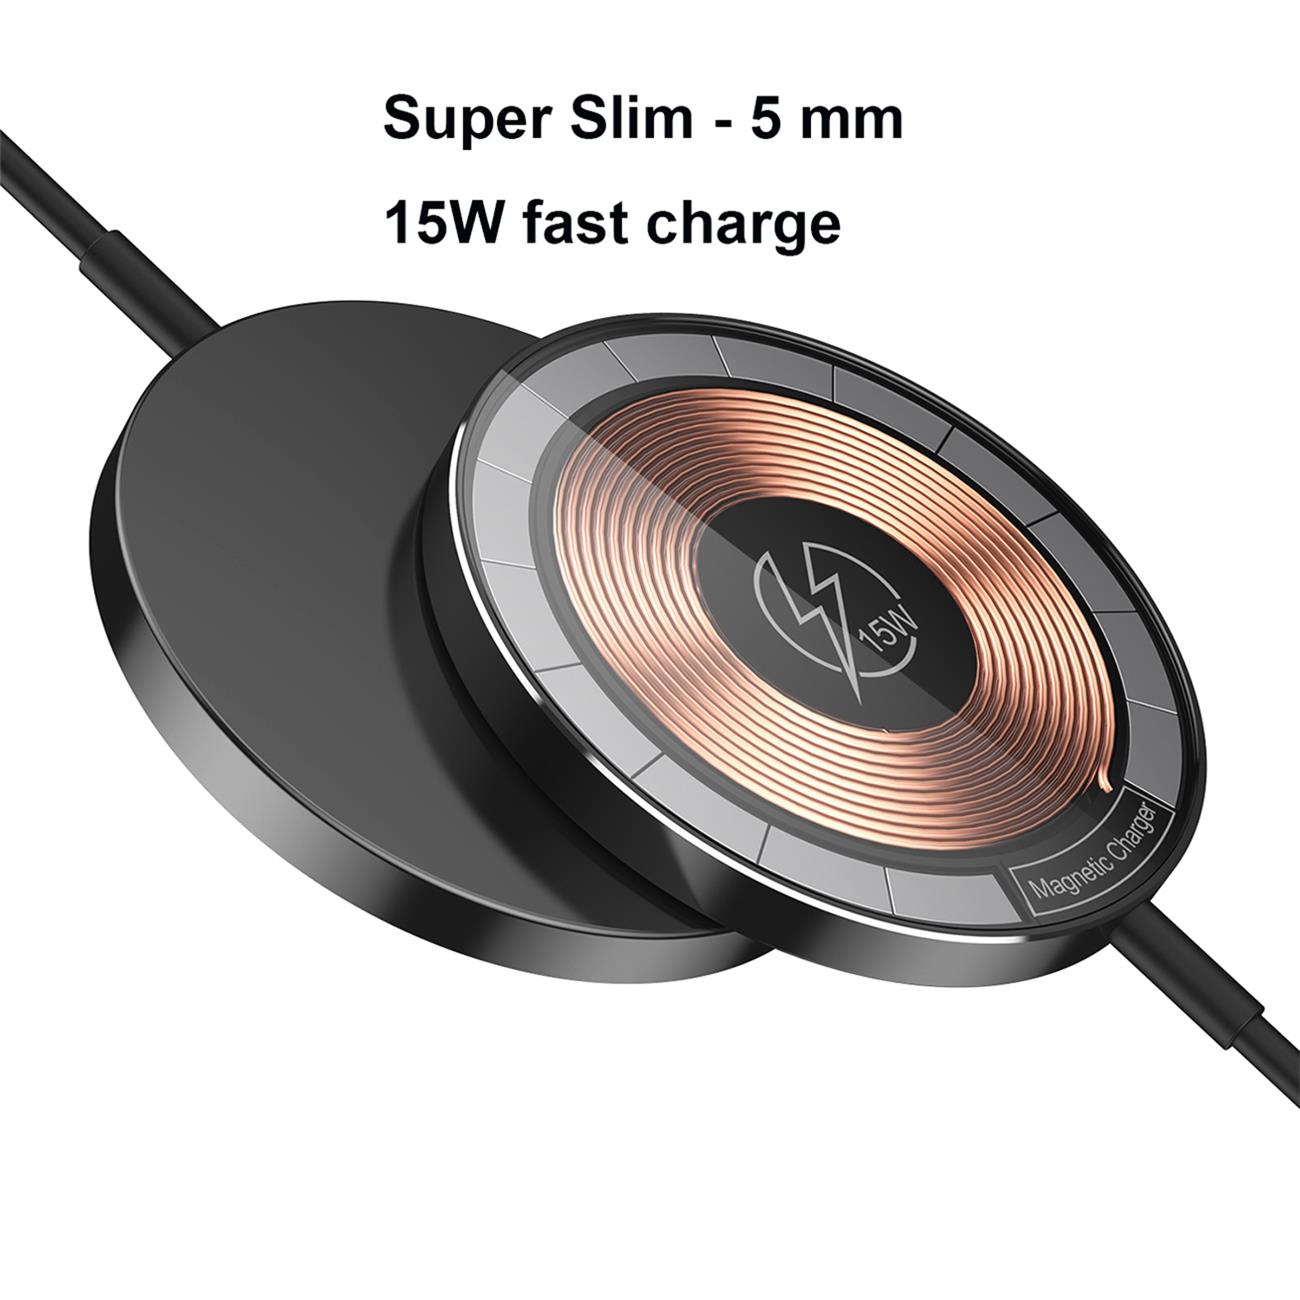 Magnetic Wireless Charger Super Slim 15w Fast Charge For Smart Phone